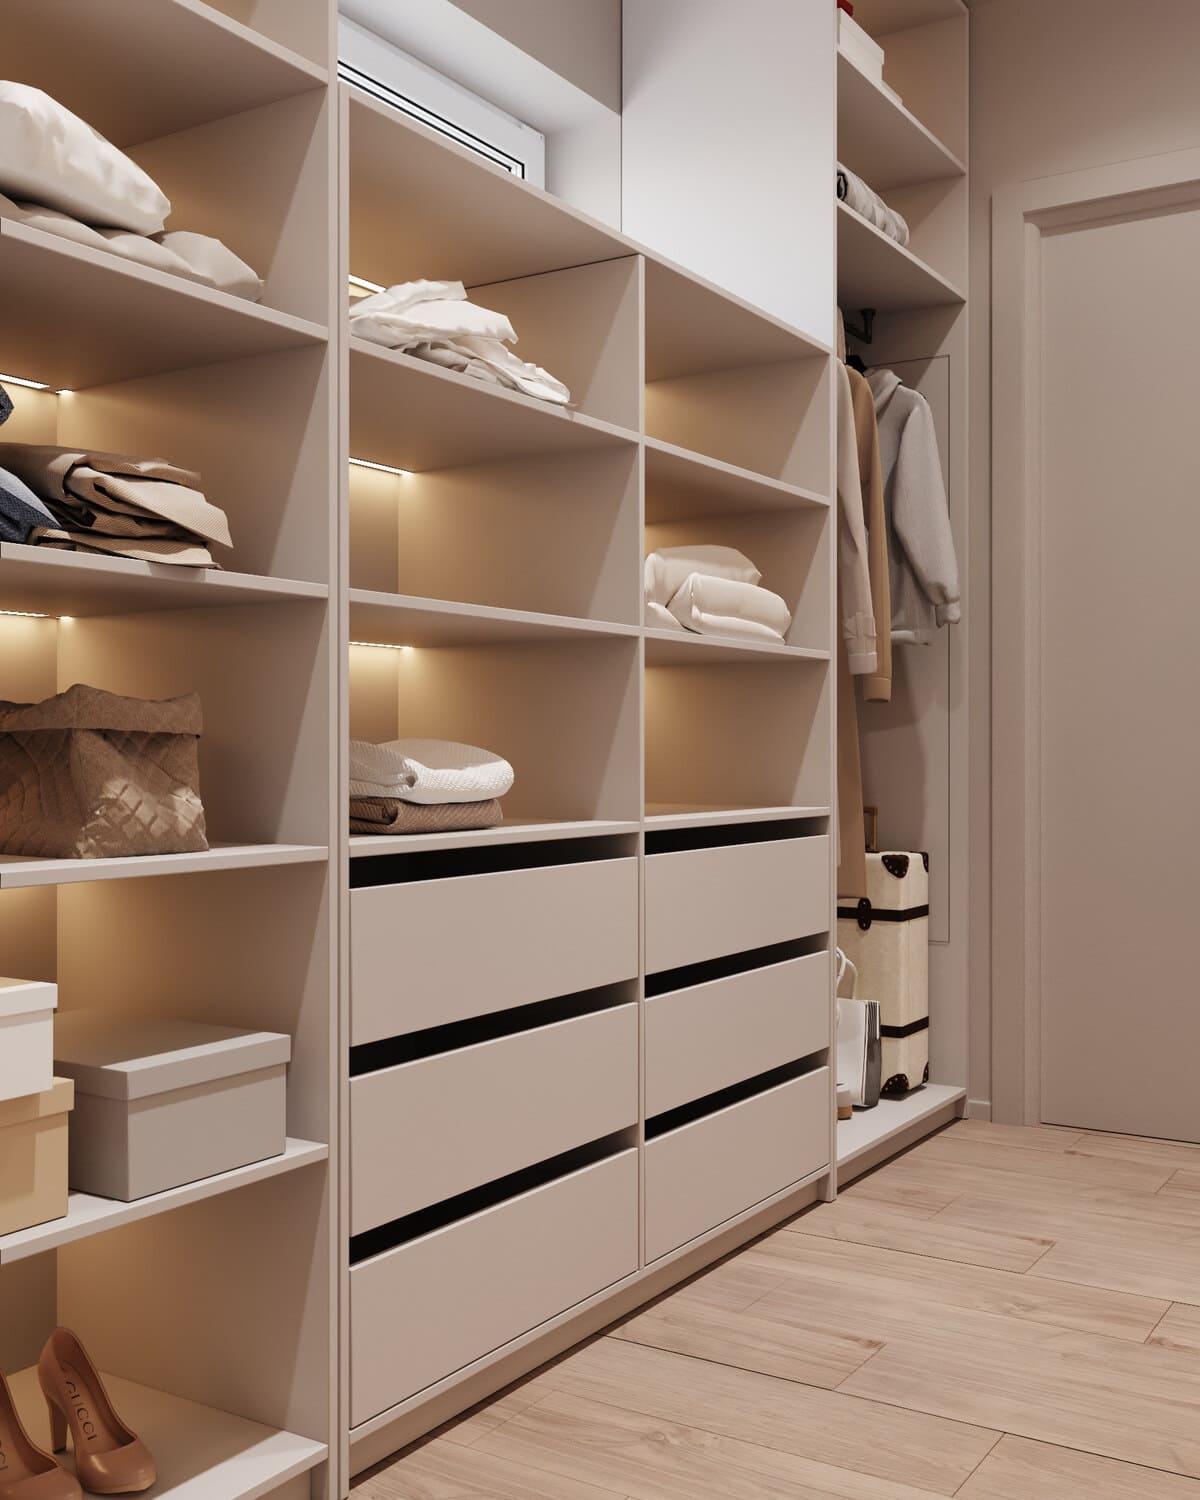 Aesthetic apartment for a young family, wardrobe, photo 11